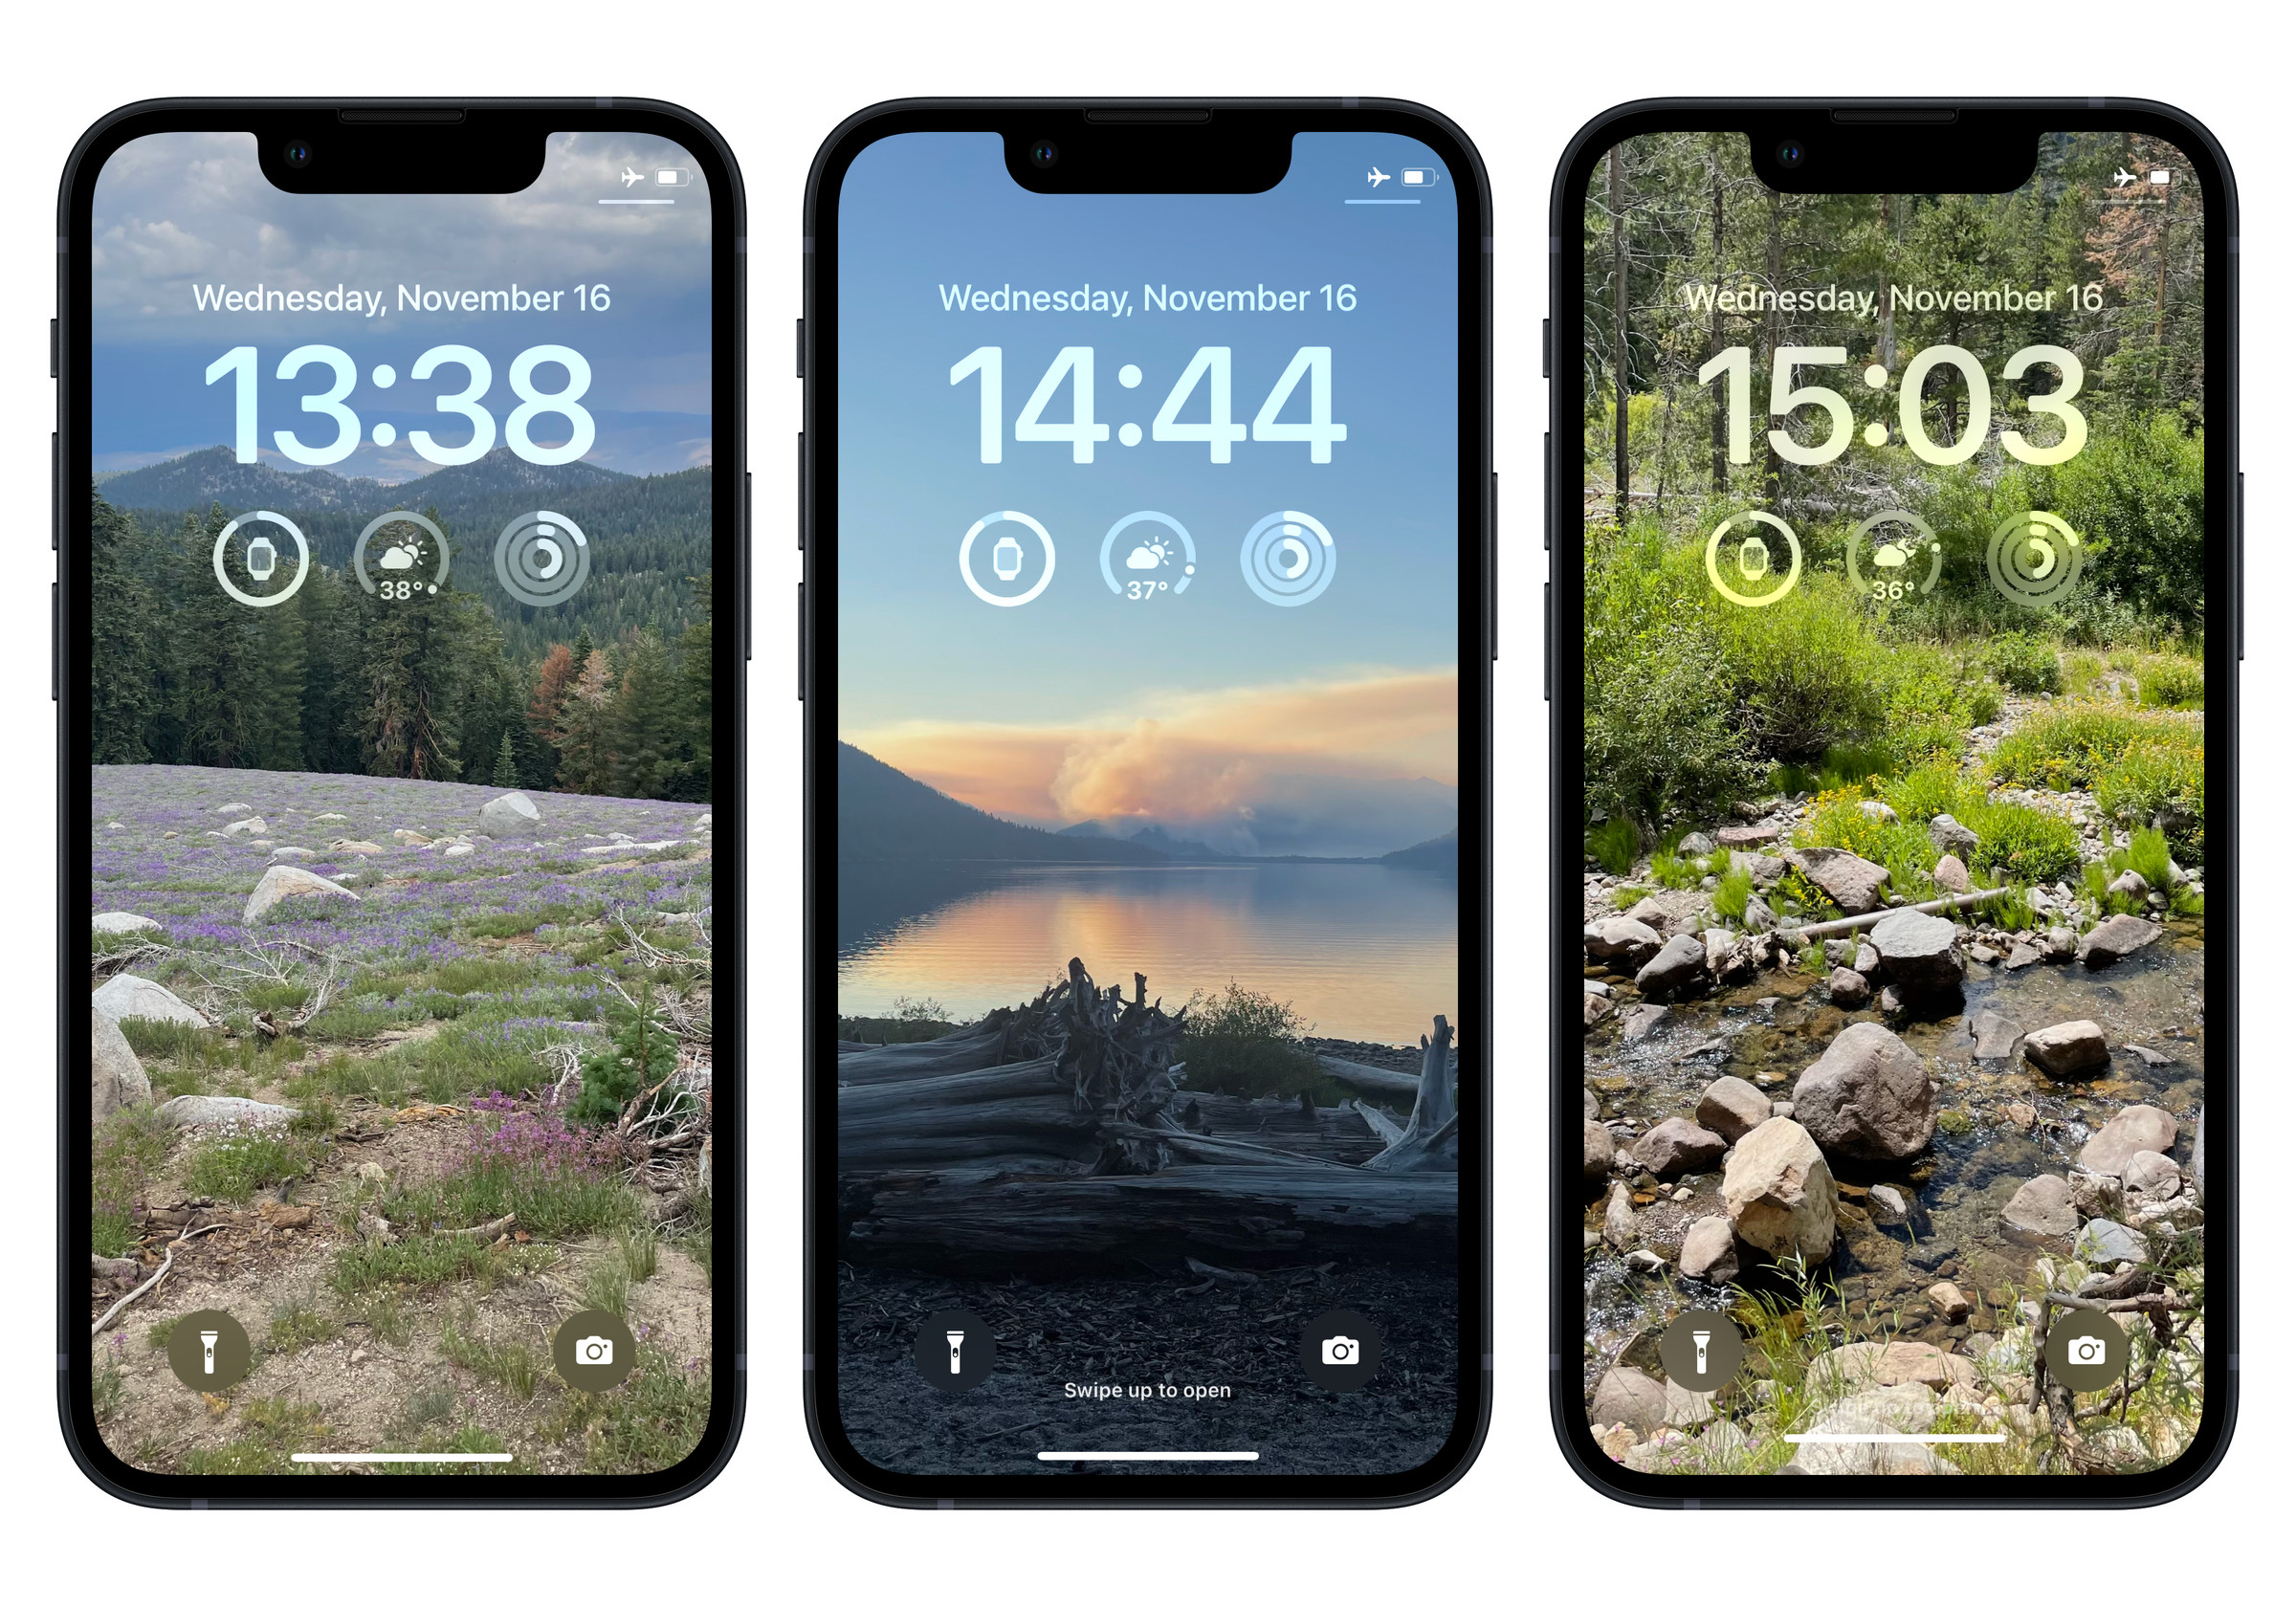 Screenshots of three iPhone lockscreens, one showing a mountain field, one showing a lake, and one showing a stream.